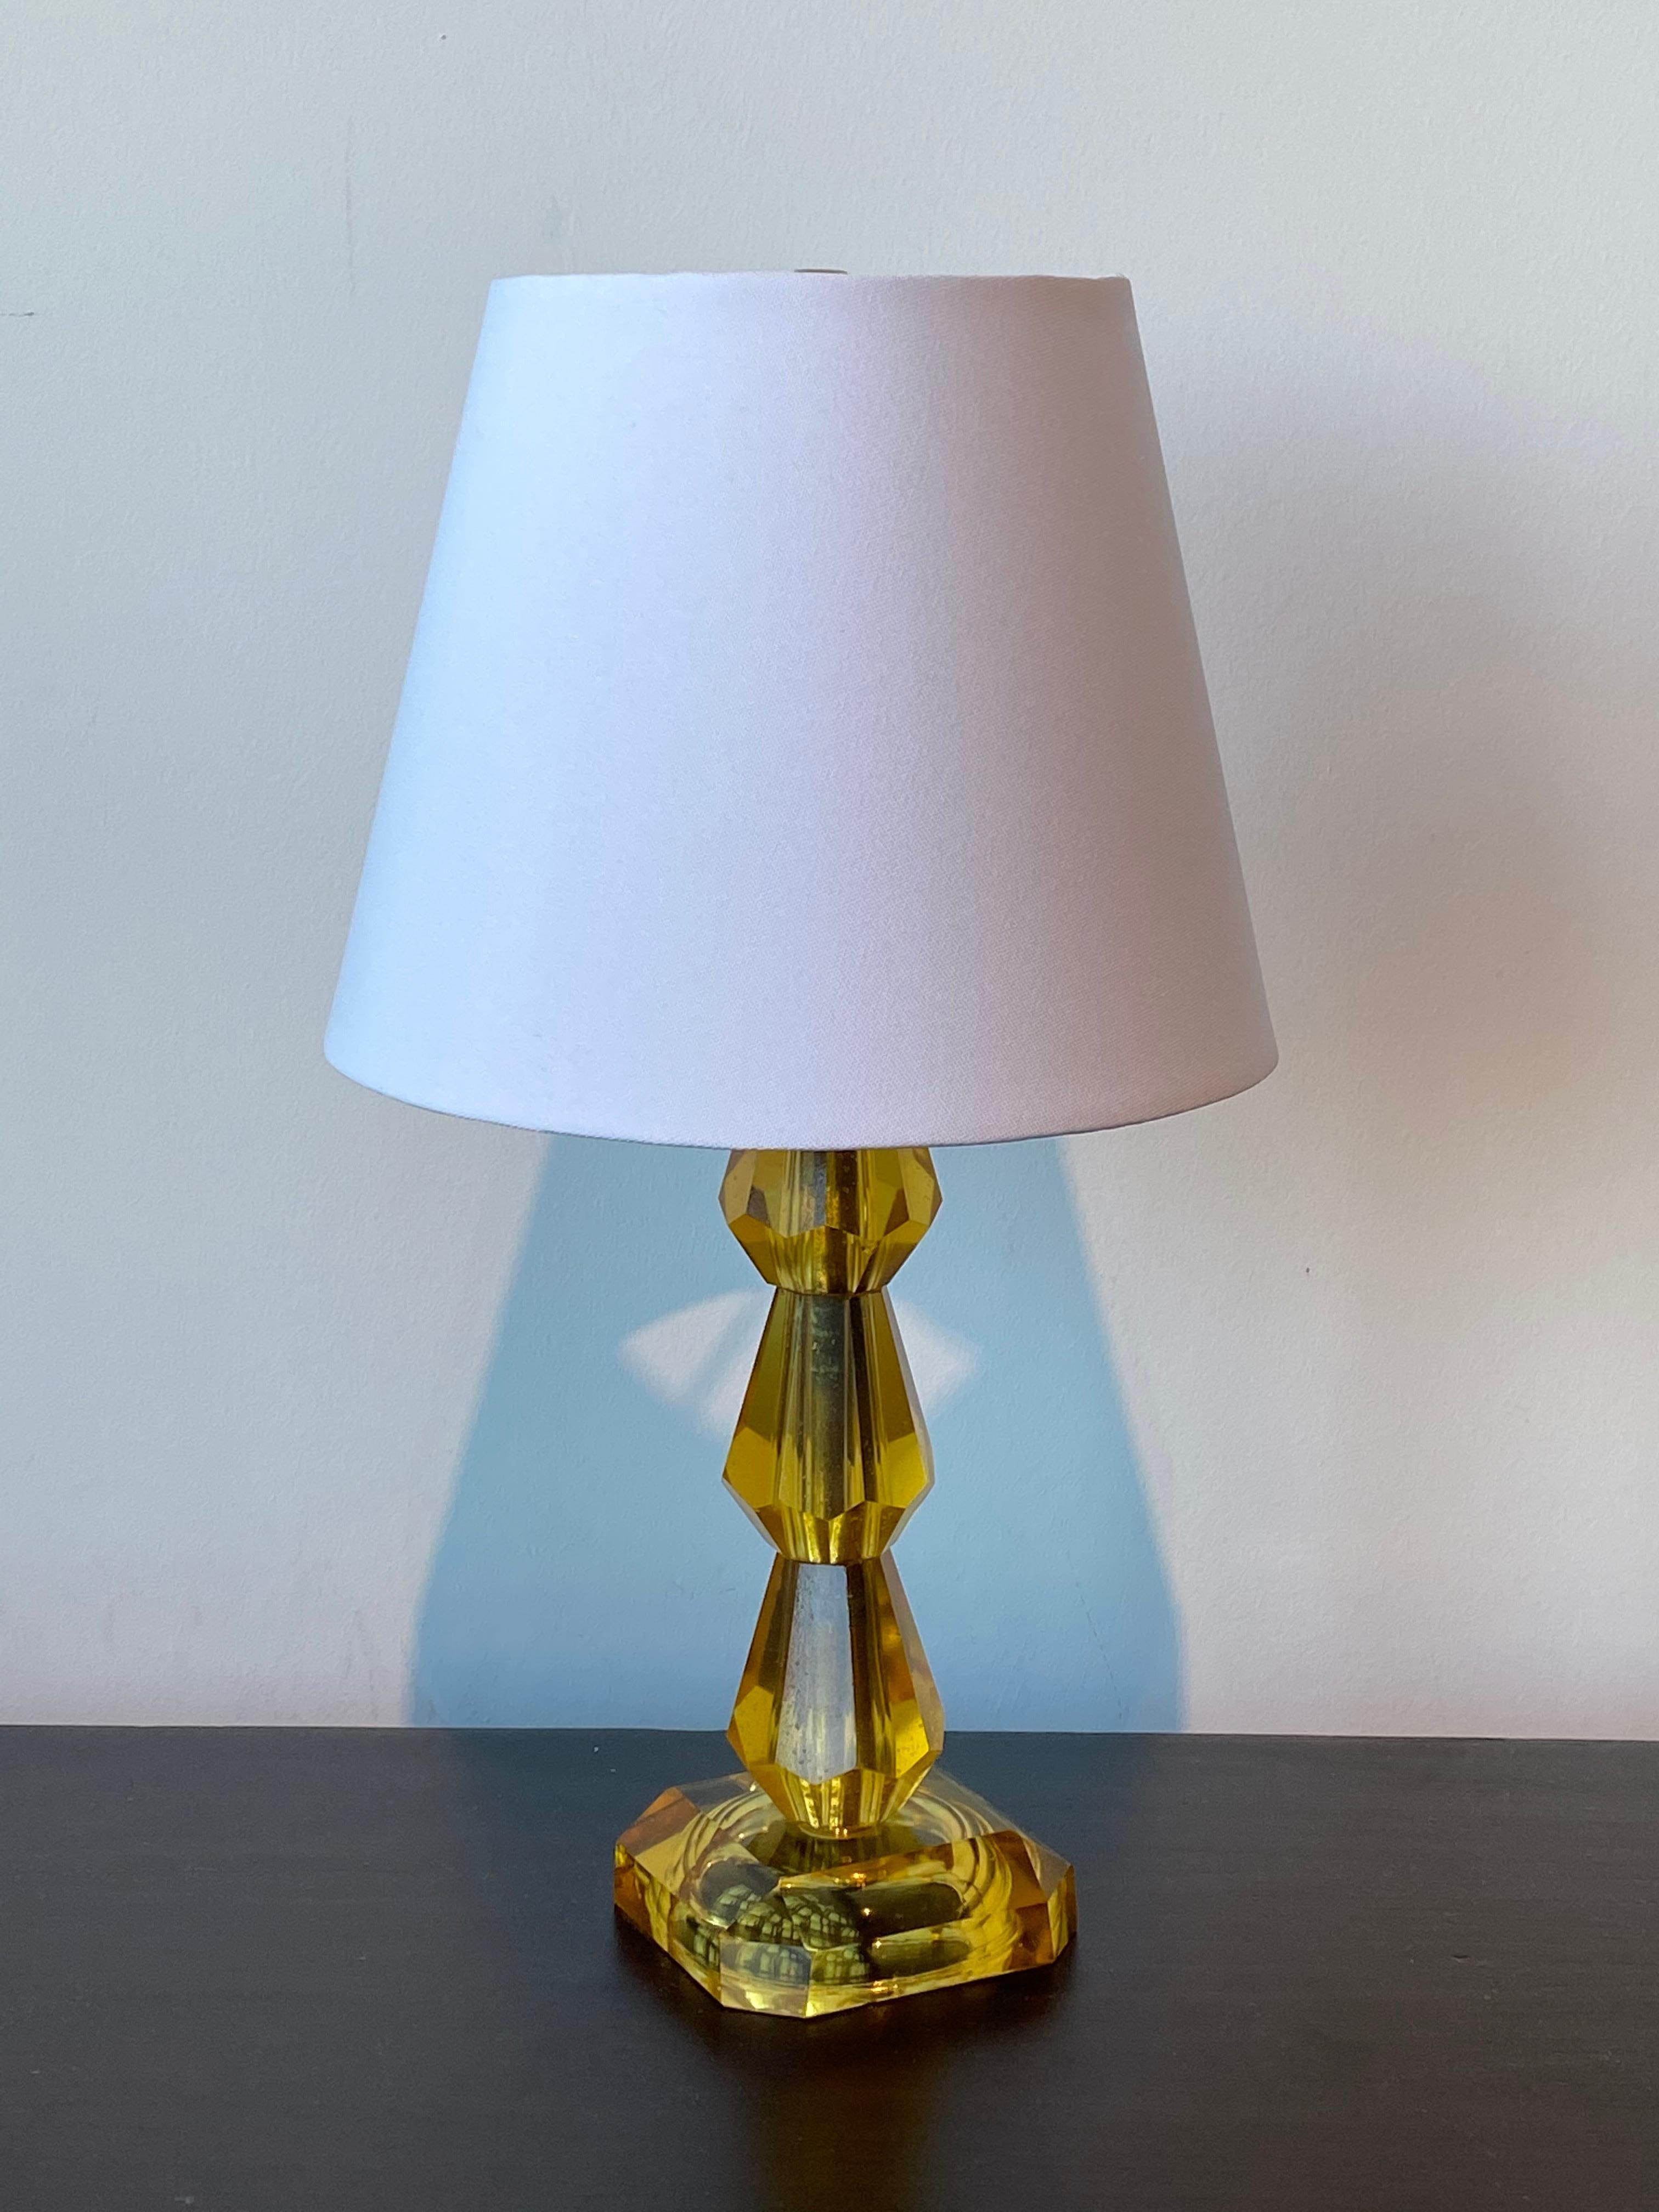 A highly modernist organic table lamp. Of Swedish production. In highly ornamented and colored glass, 1960s. 

Lampshade in is not included in the purchase. Stated measurements are without a lampshade.

Other designers of the period include